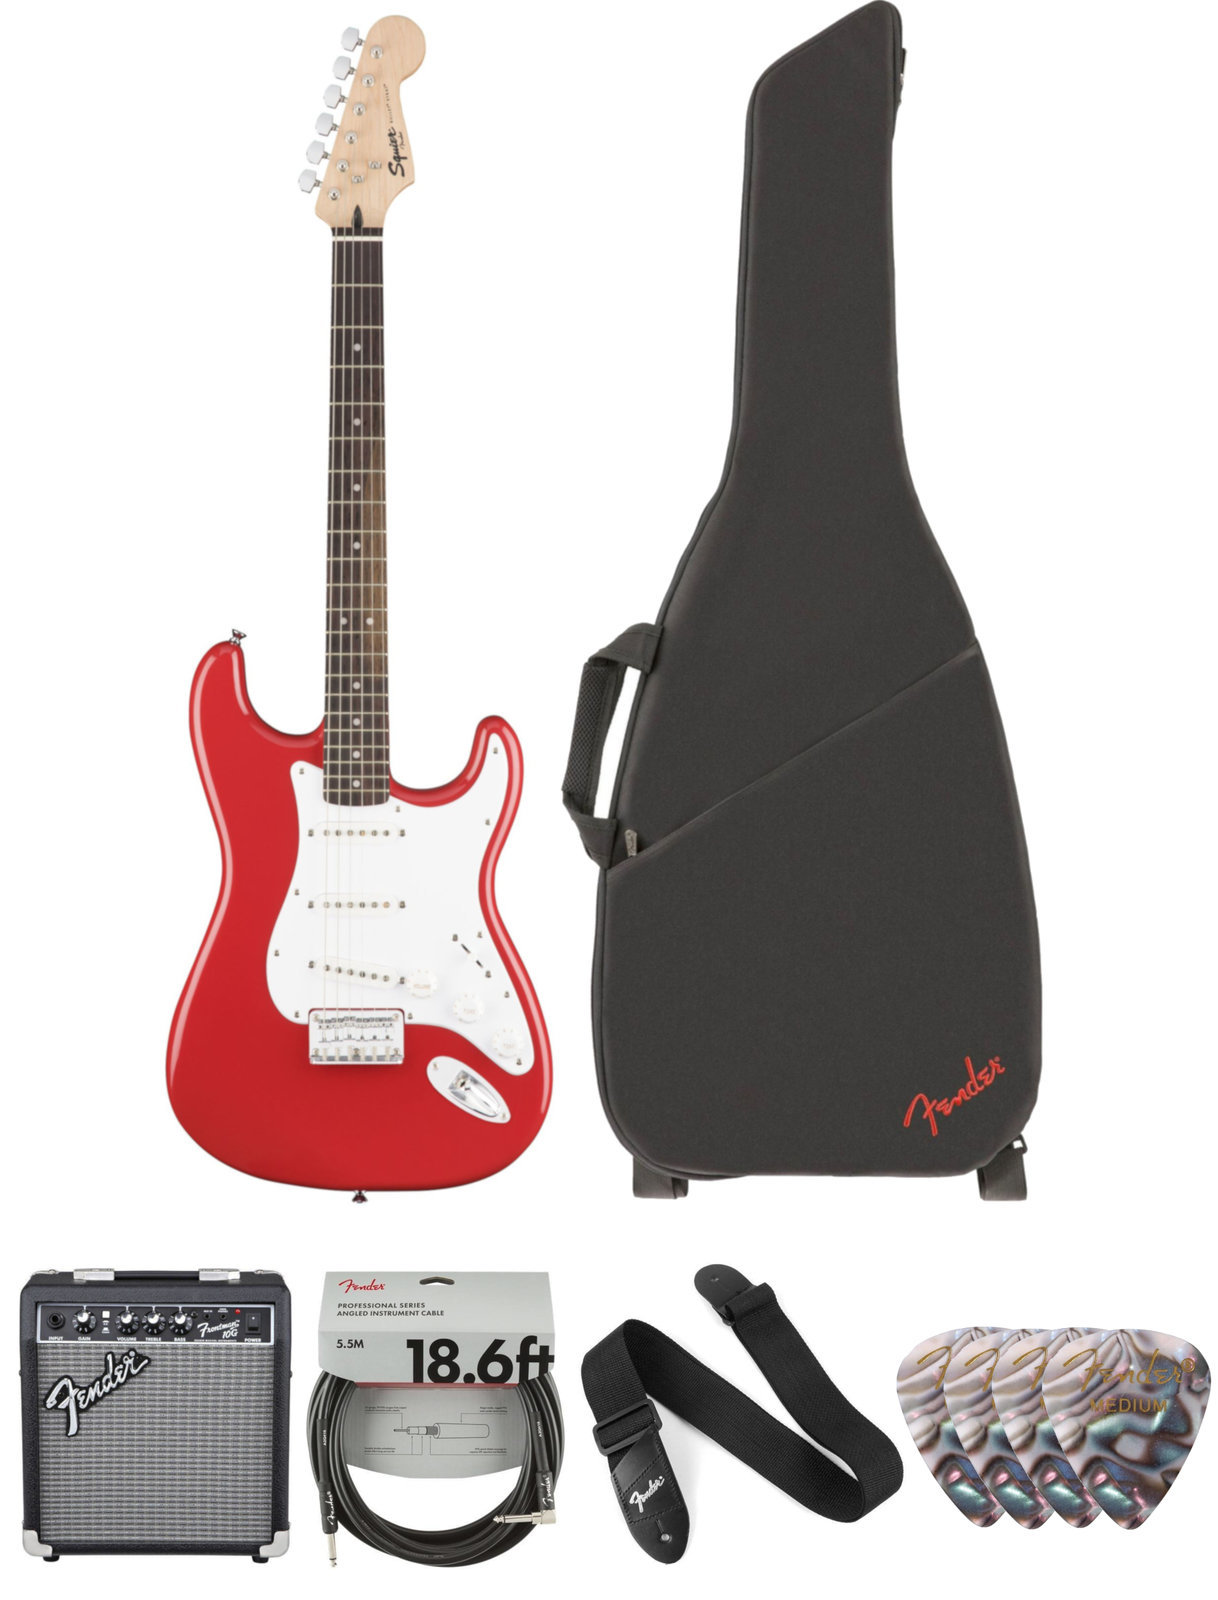 Electric guitar Fender Squier Bullet Stratocaster HT IL Fiesta Red Deluxe SET Fiesta Red